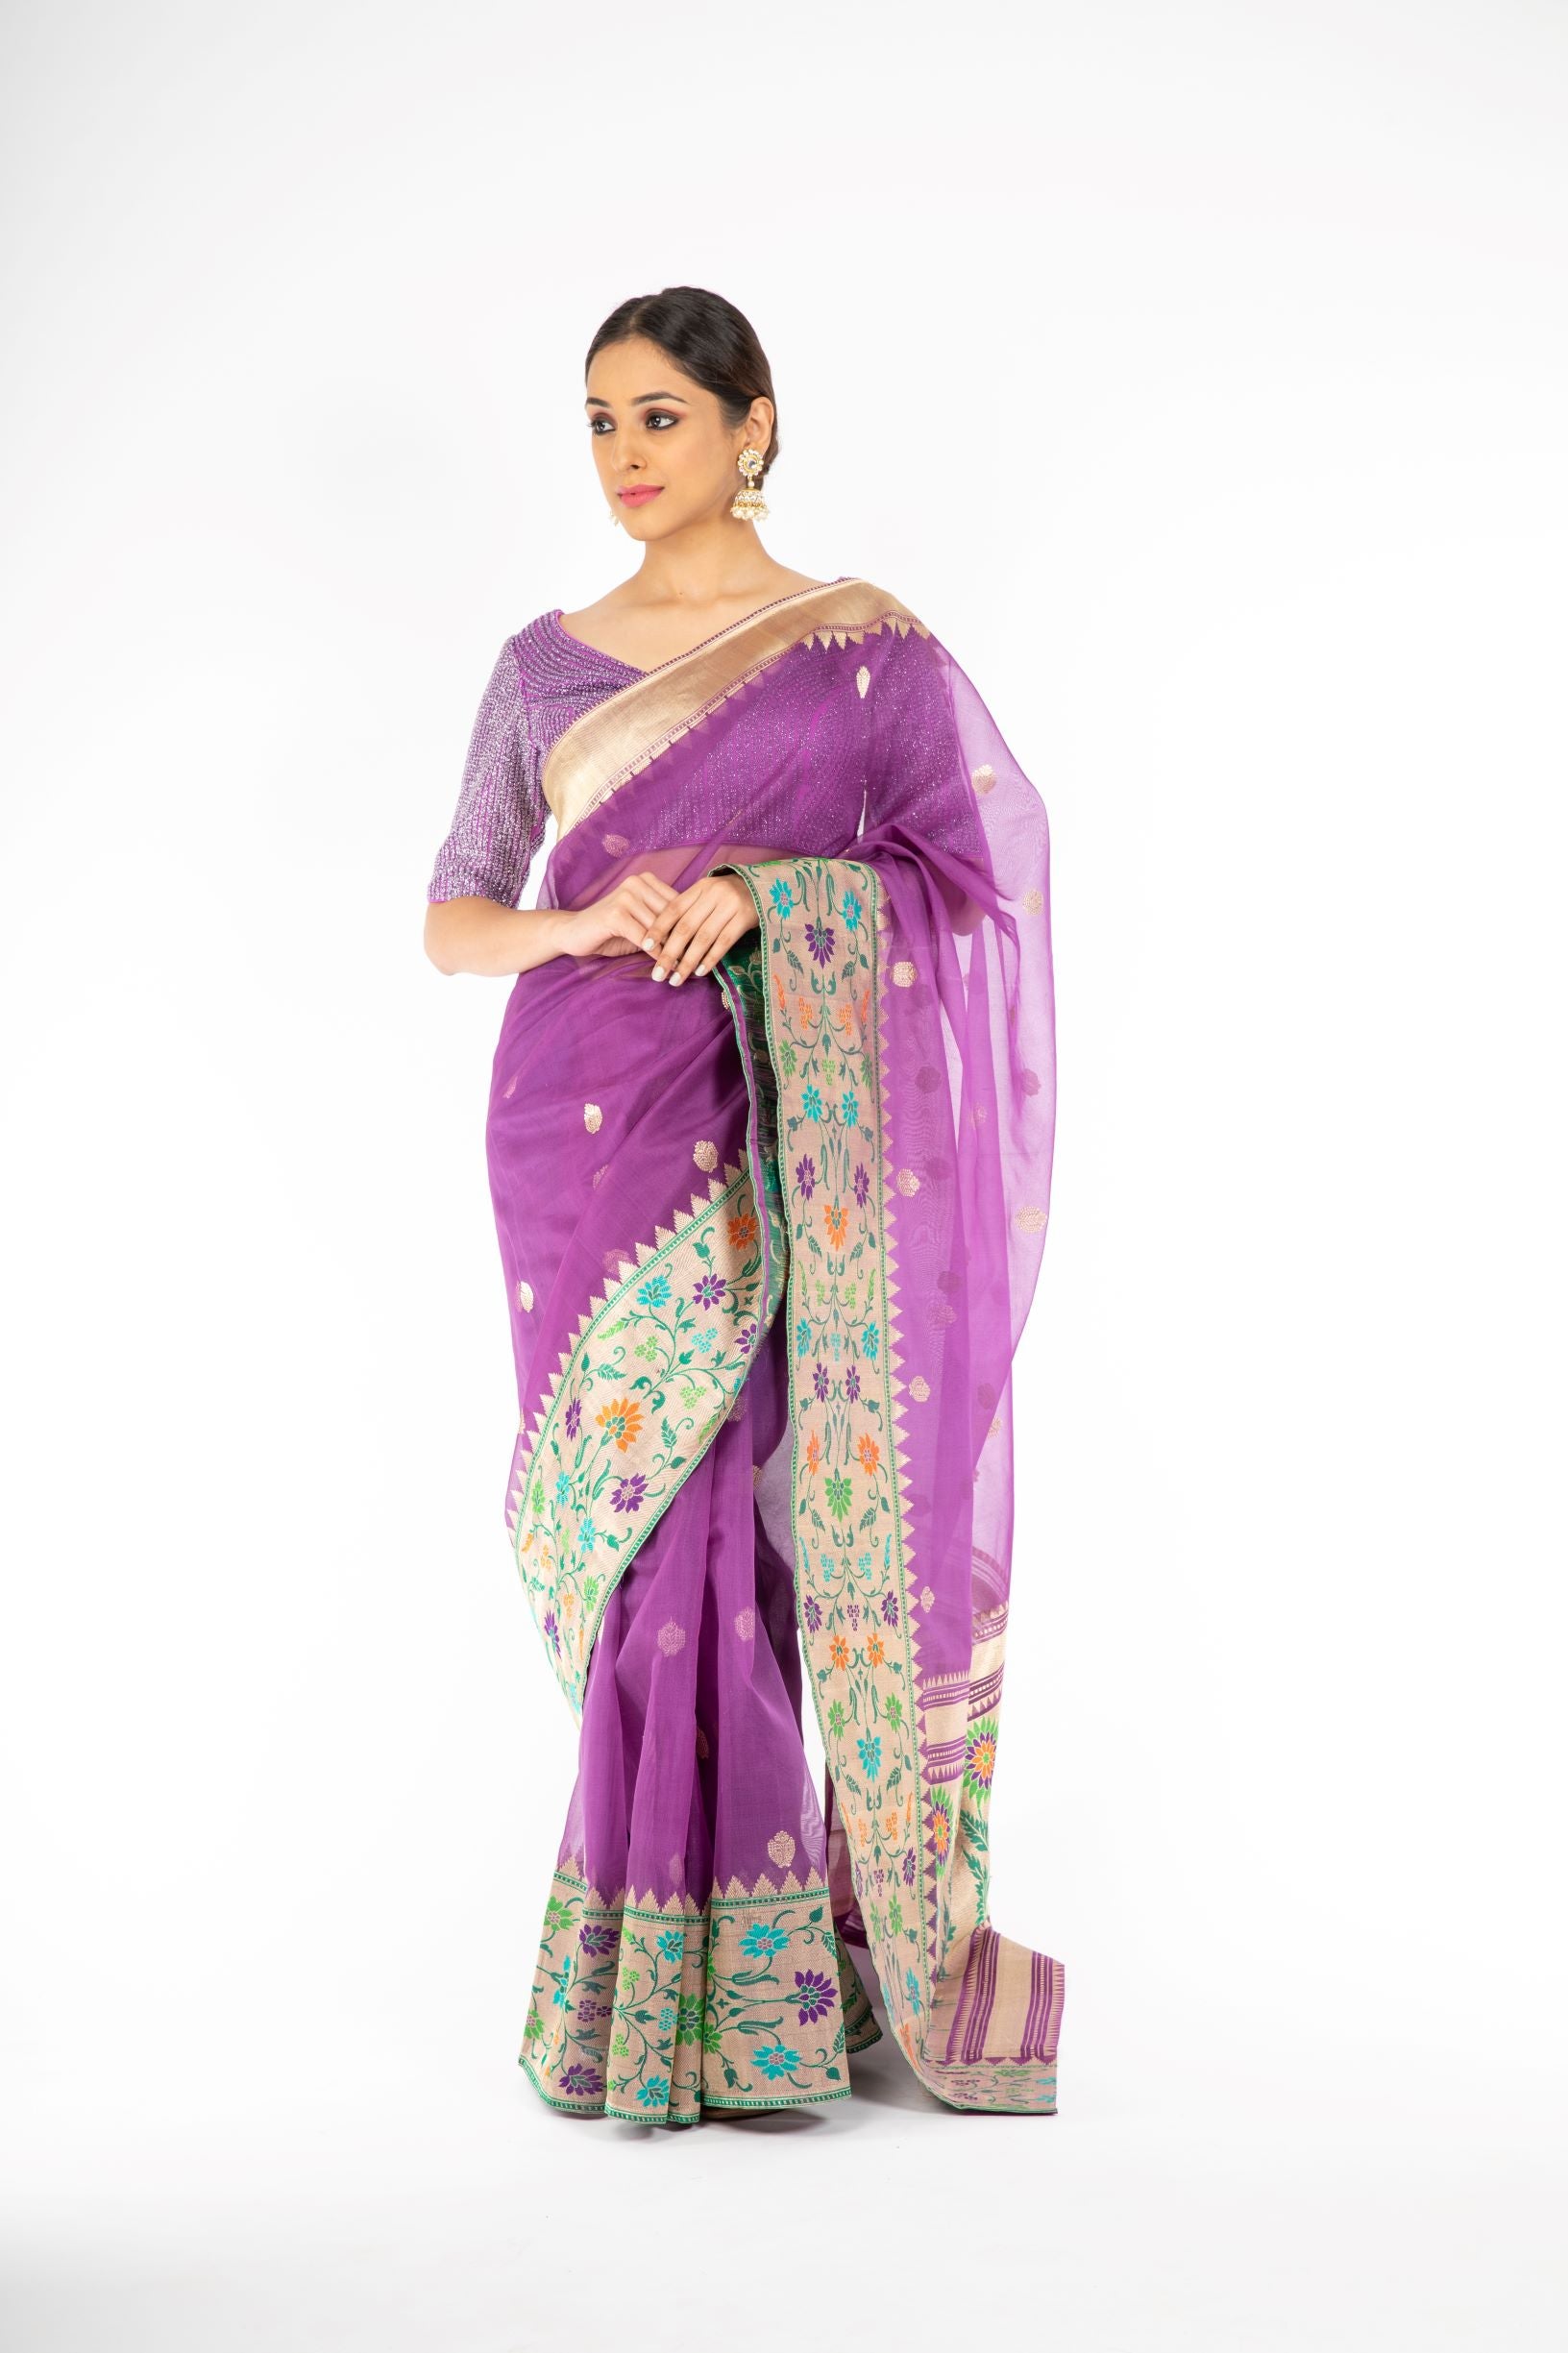 Engrossing Bright Violet Handloom Saree with Paithani Border and Pallu